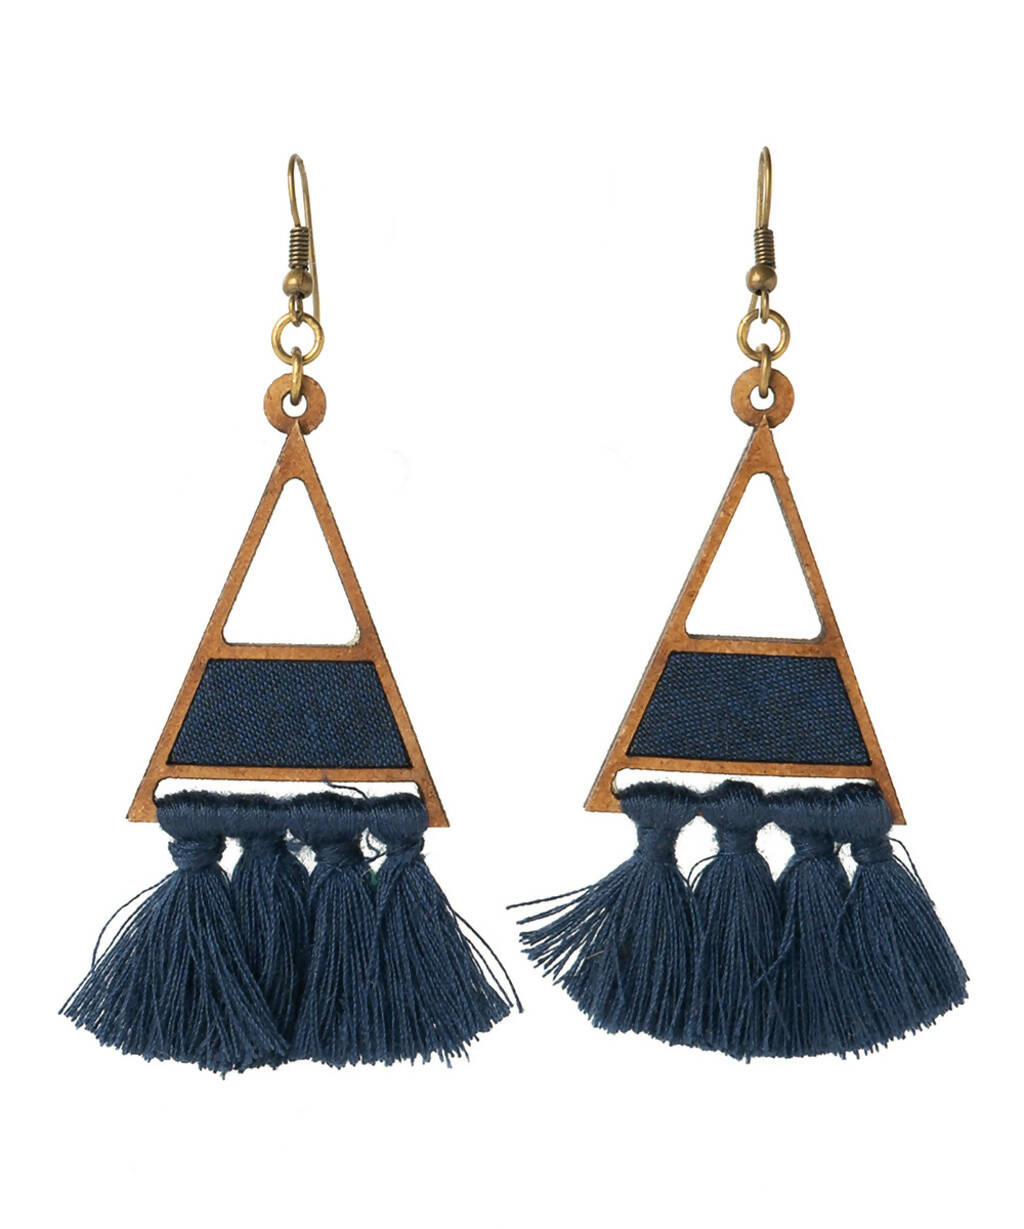 TWO IN ONE BLACK TRIANGLE EARRING